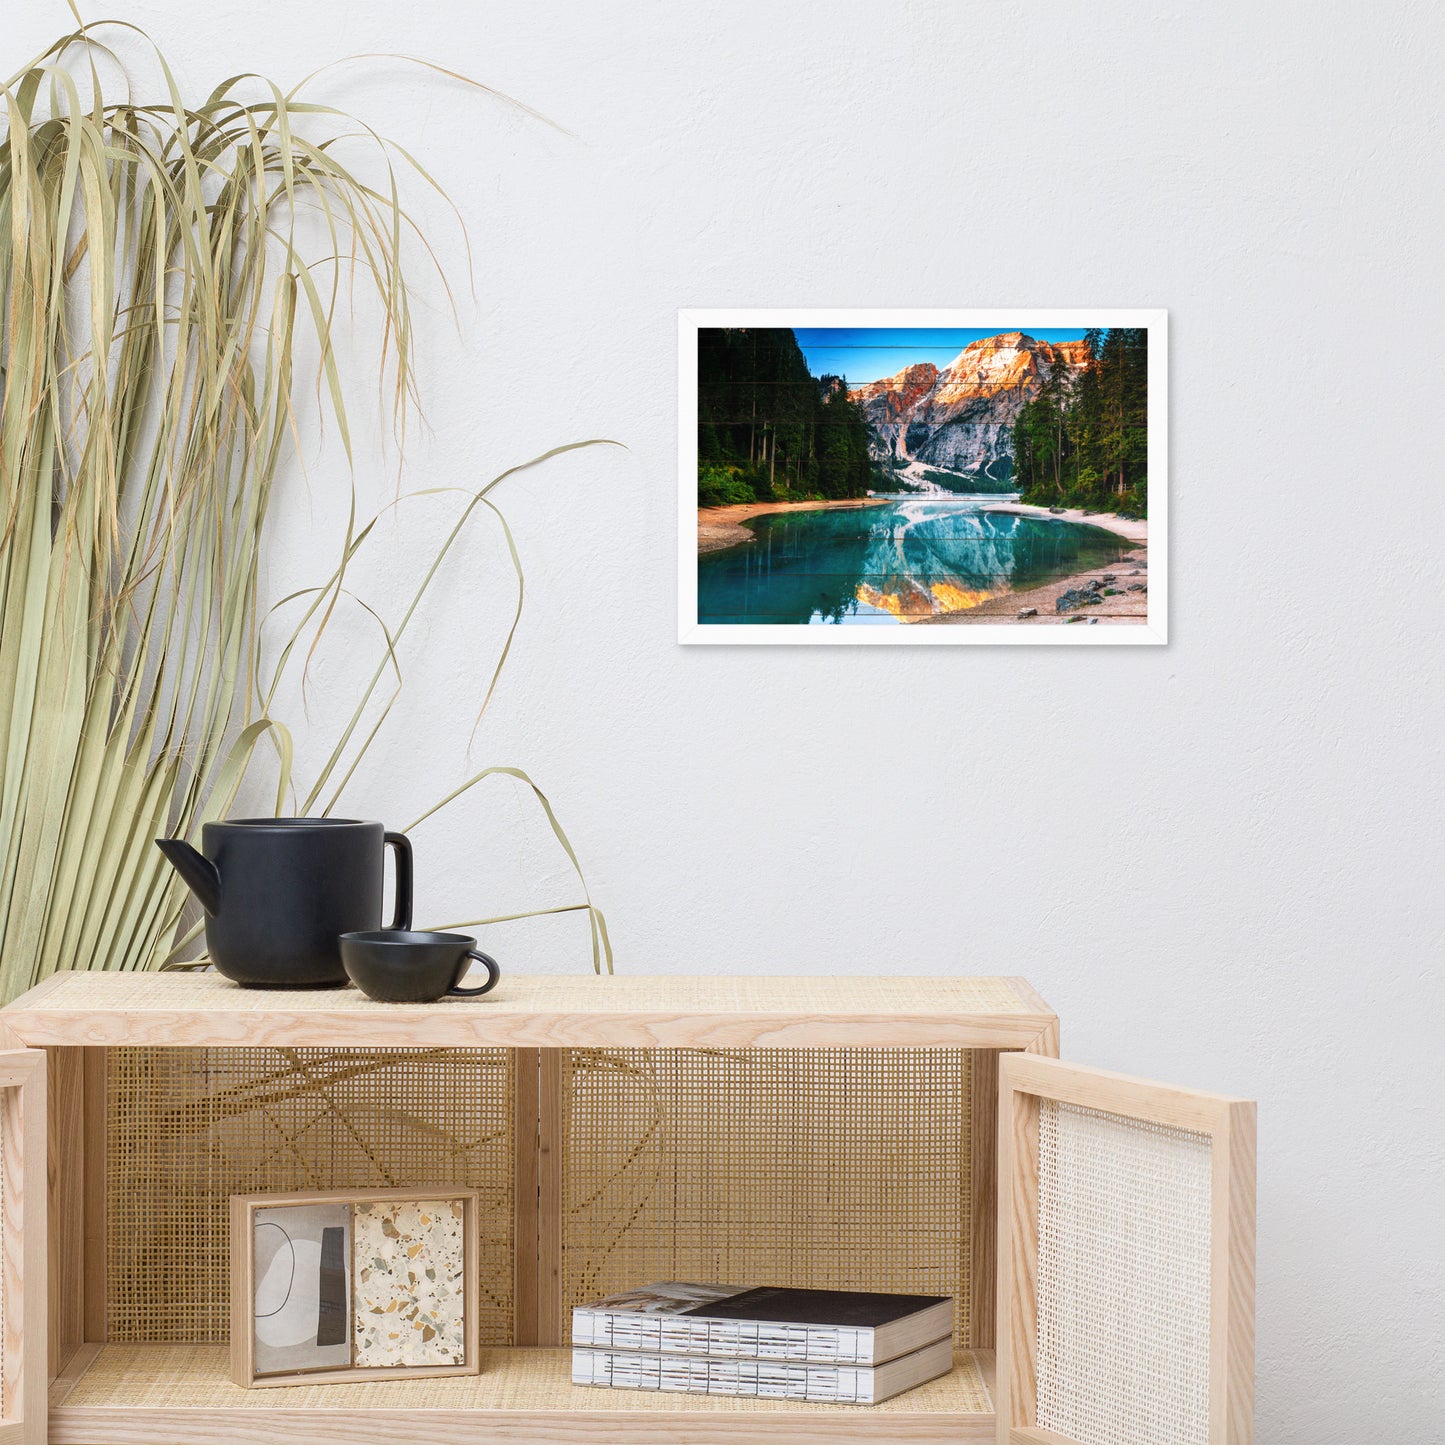 Faux Wood Misty Lake and Snowcap Mountain Reflections Framed Photo Paper Wall Art Prints